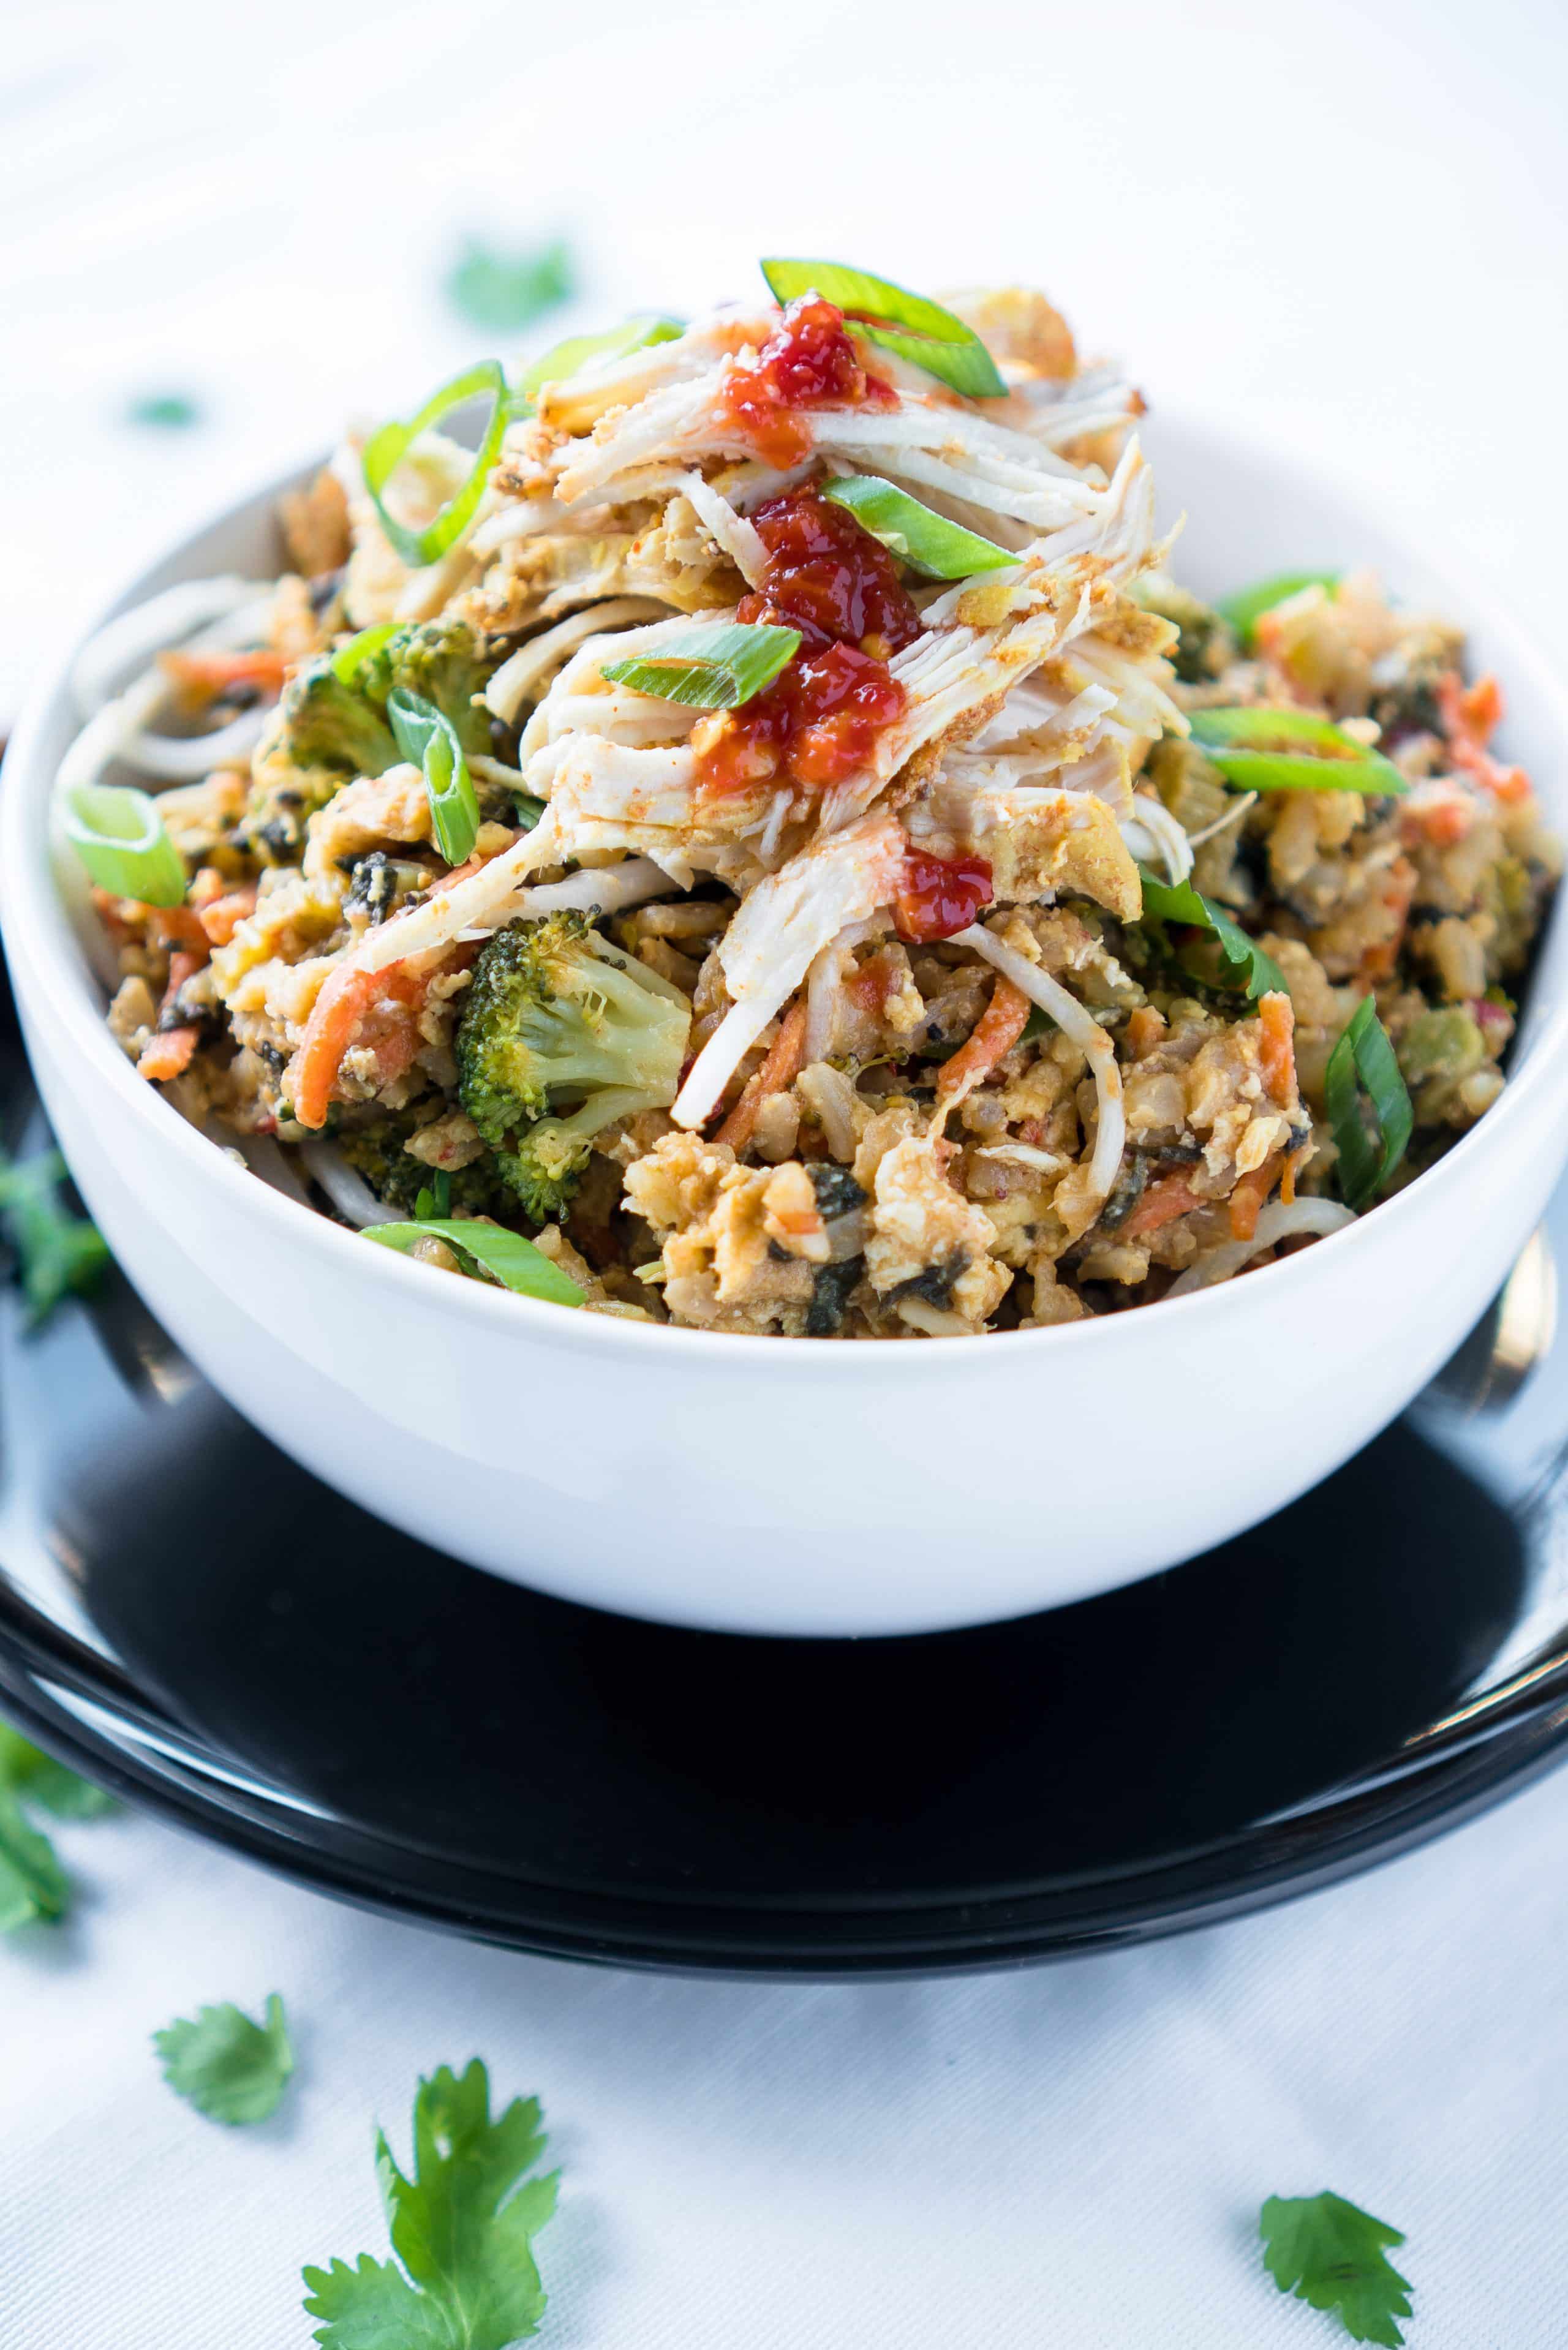 Healthy Fried Rice – 30 min recipe for Healthy Fried Rice with gluten-free chili garlic peanut sauce! Using wholesome ingredients like brown rice, coconut oil, broccoli, spinach, carrots, celery, and bean sprouts. Serve as a vegetarian dish or top with shredded chicken for a full meal! ♥ | freeyourfork.com